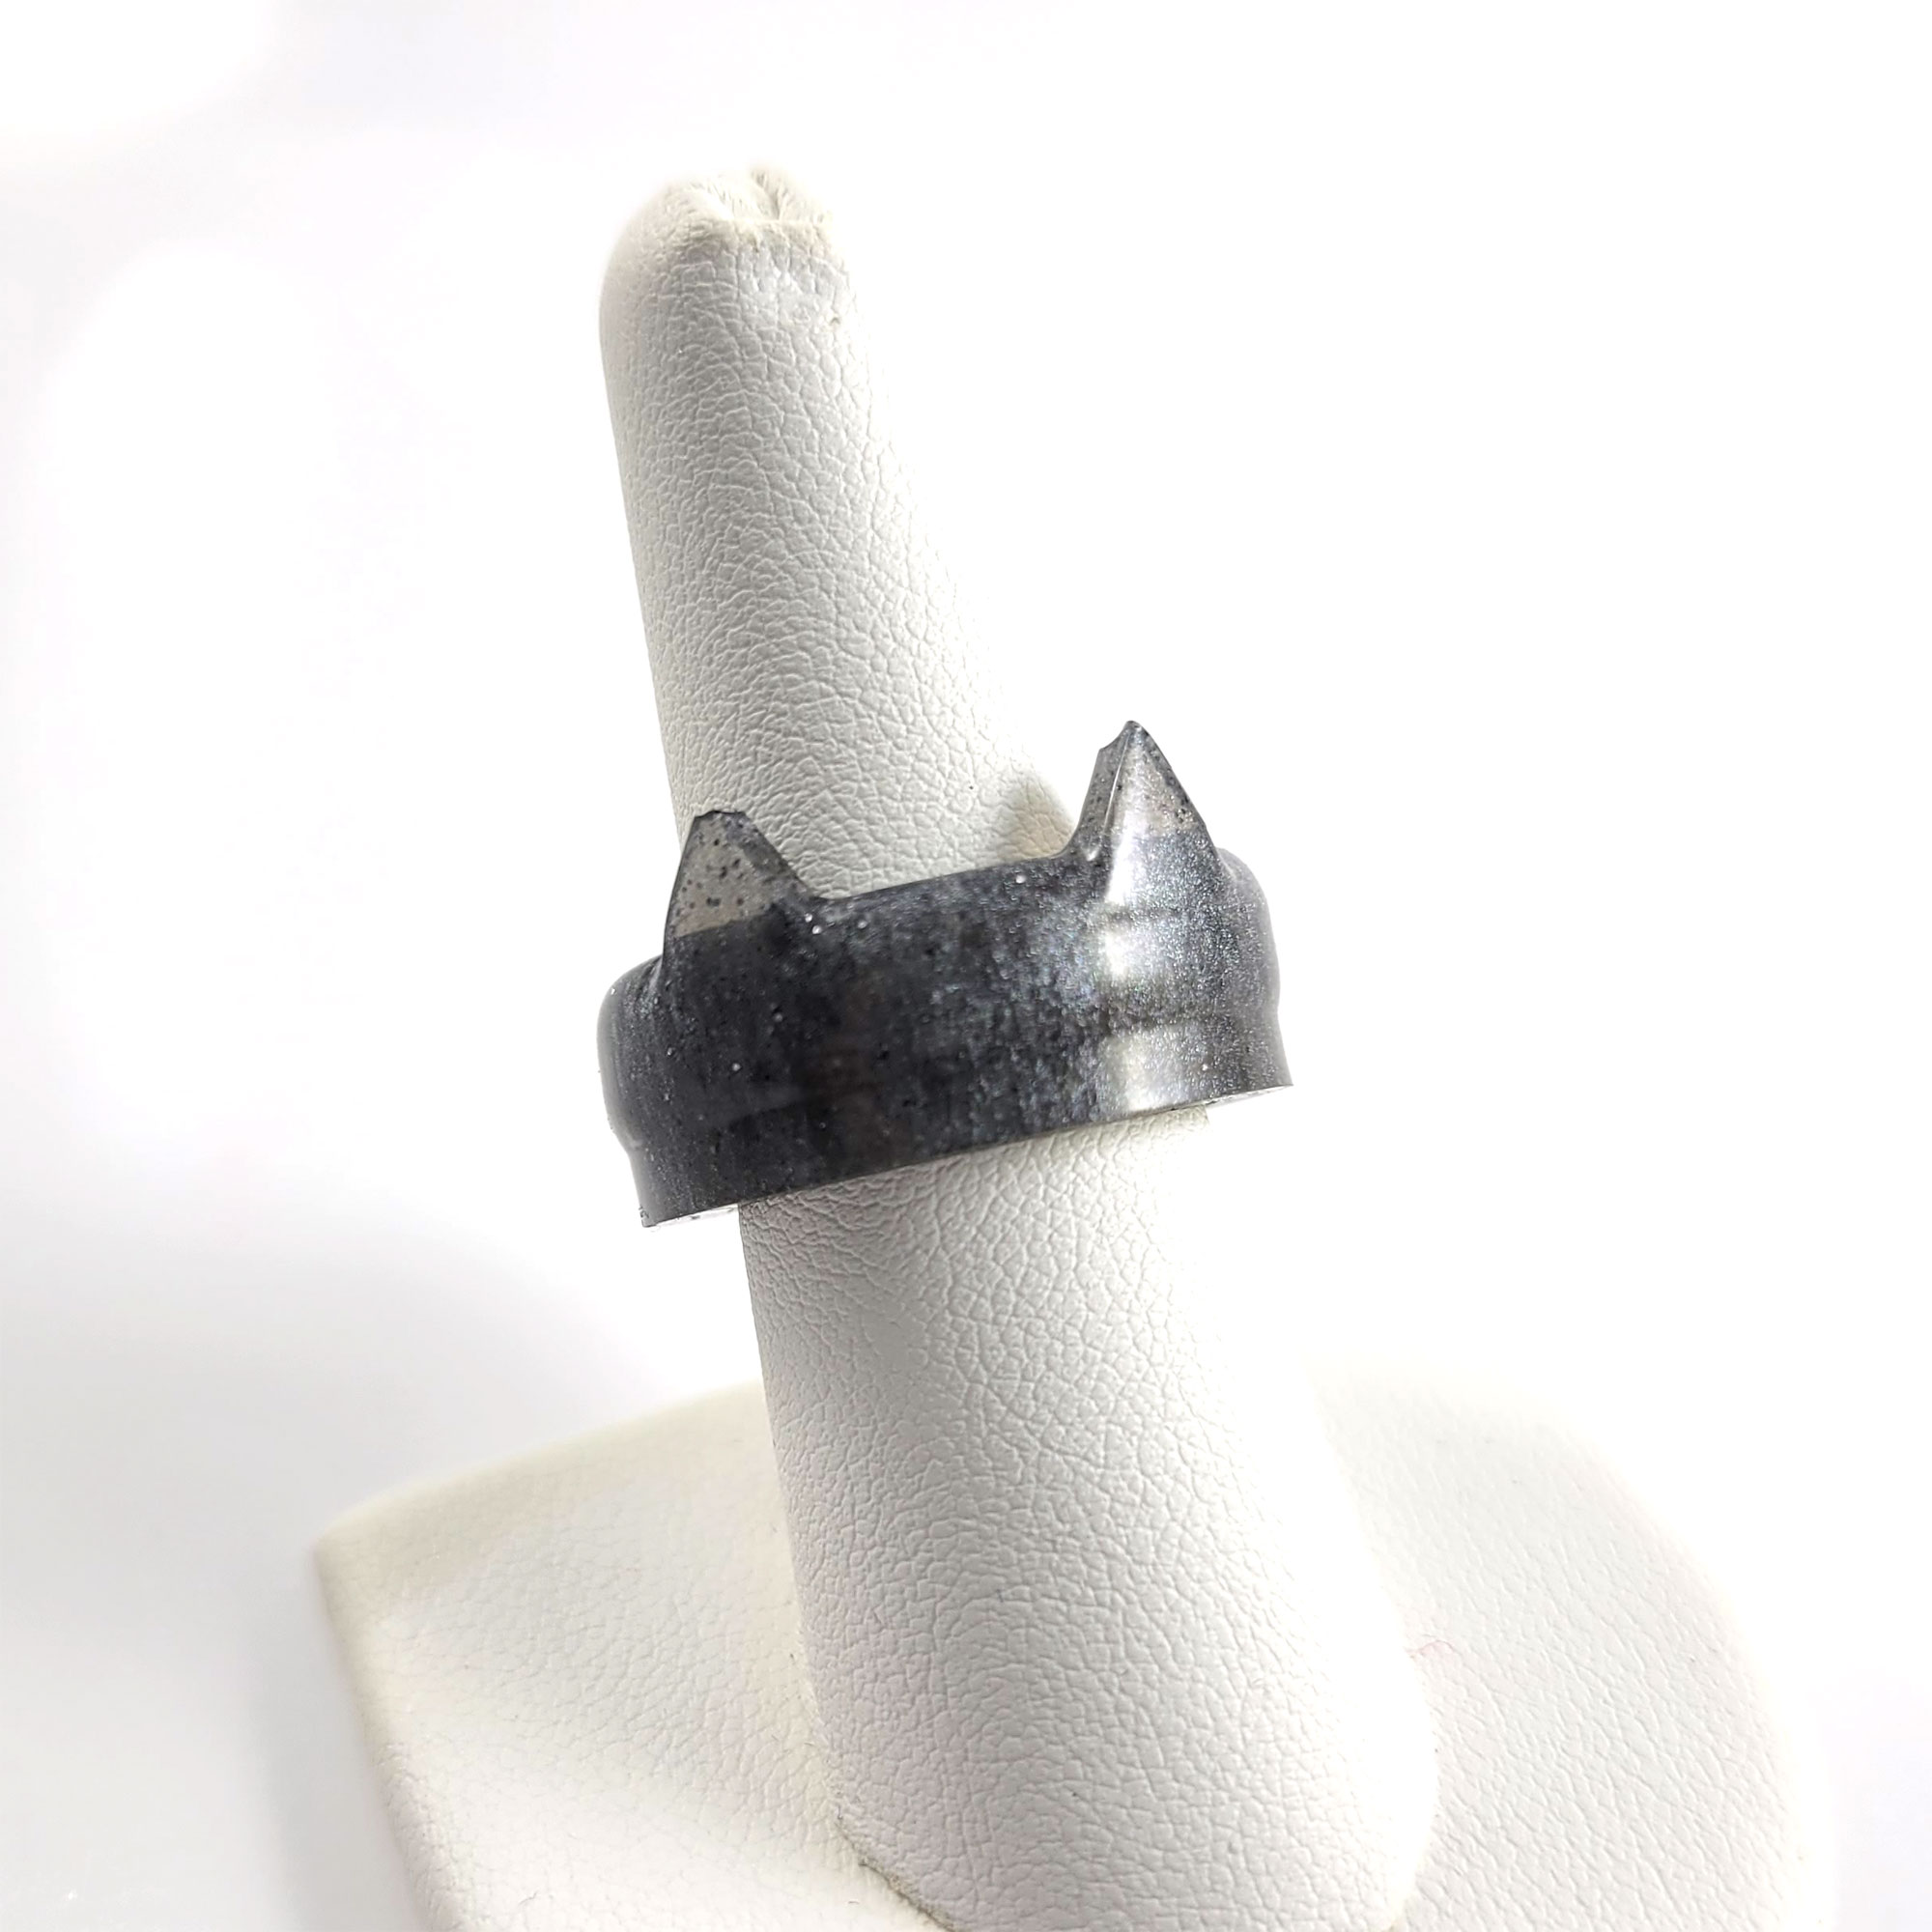 Sturdy Kitty Ring by Wilde Designs